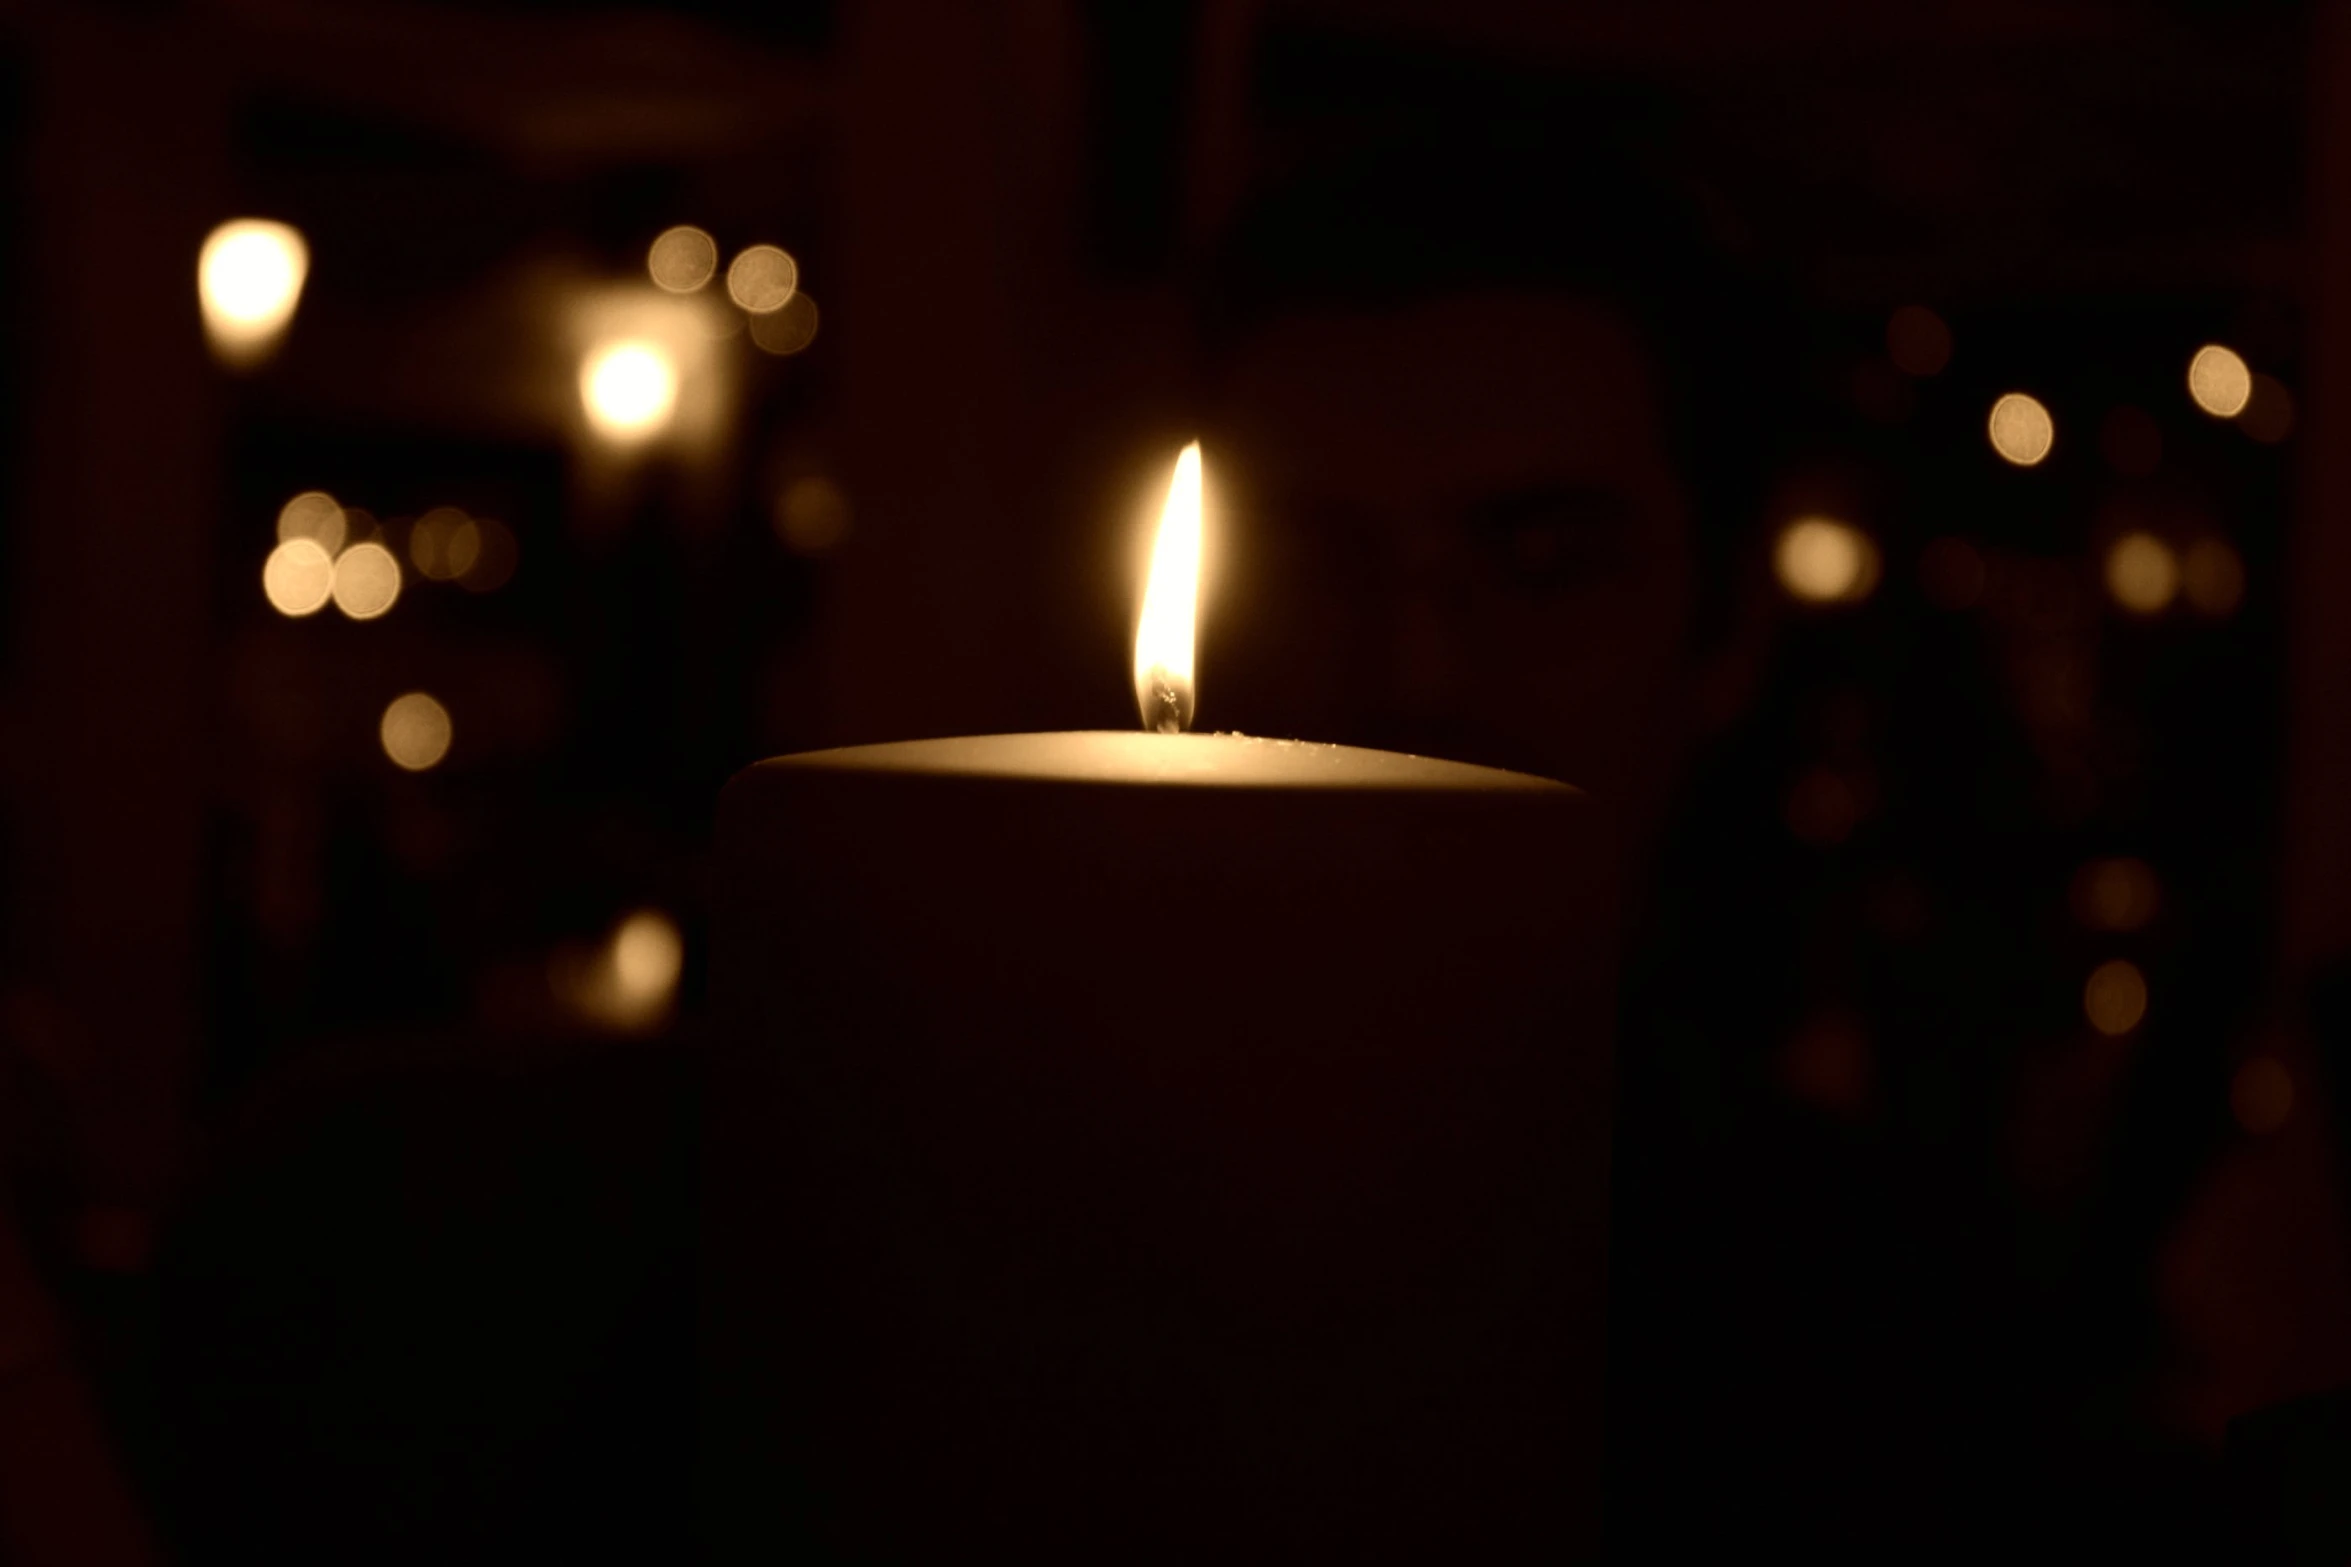 a candle in front of some candles and a person